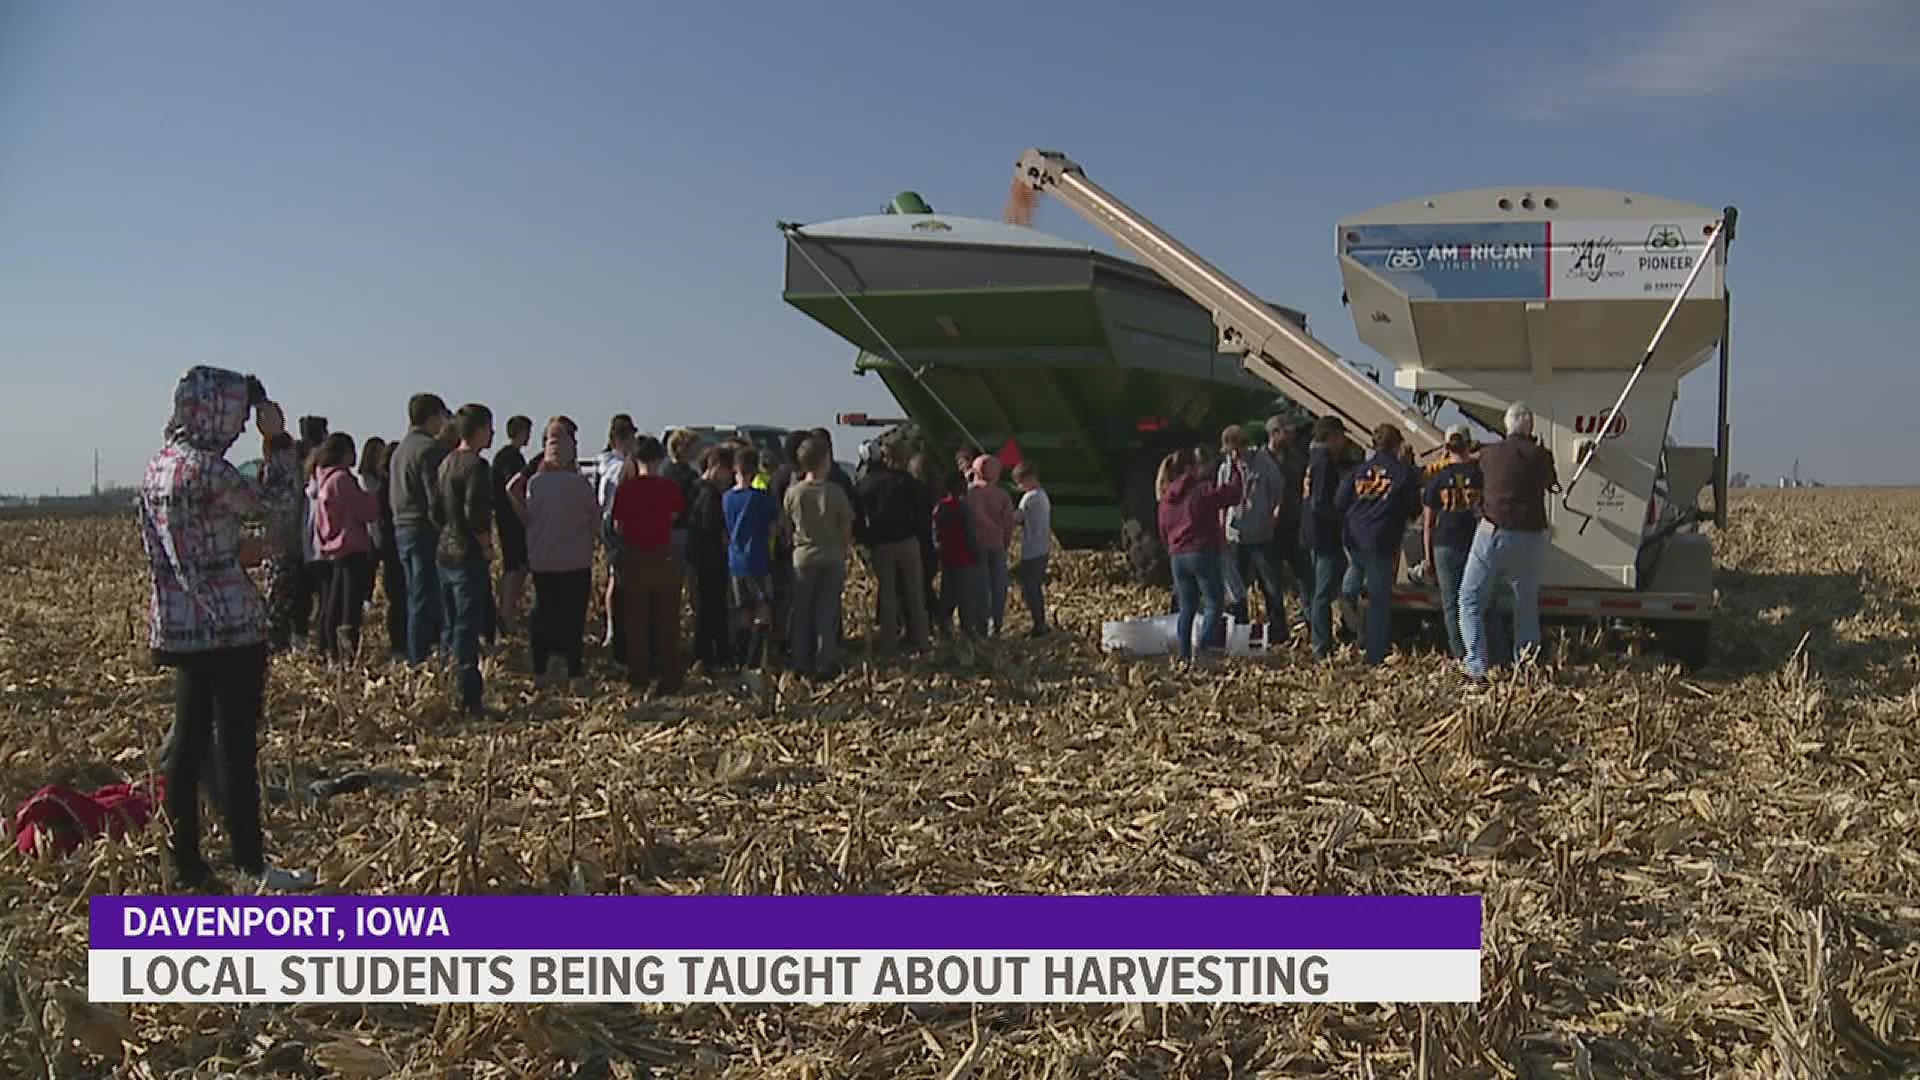 The annual event saw students from grades 7-12 learn about corn and bean harvests and watch demonstrations as some prepared to be the next generation of farmers.